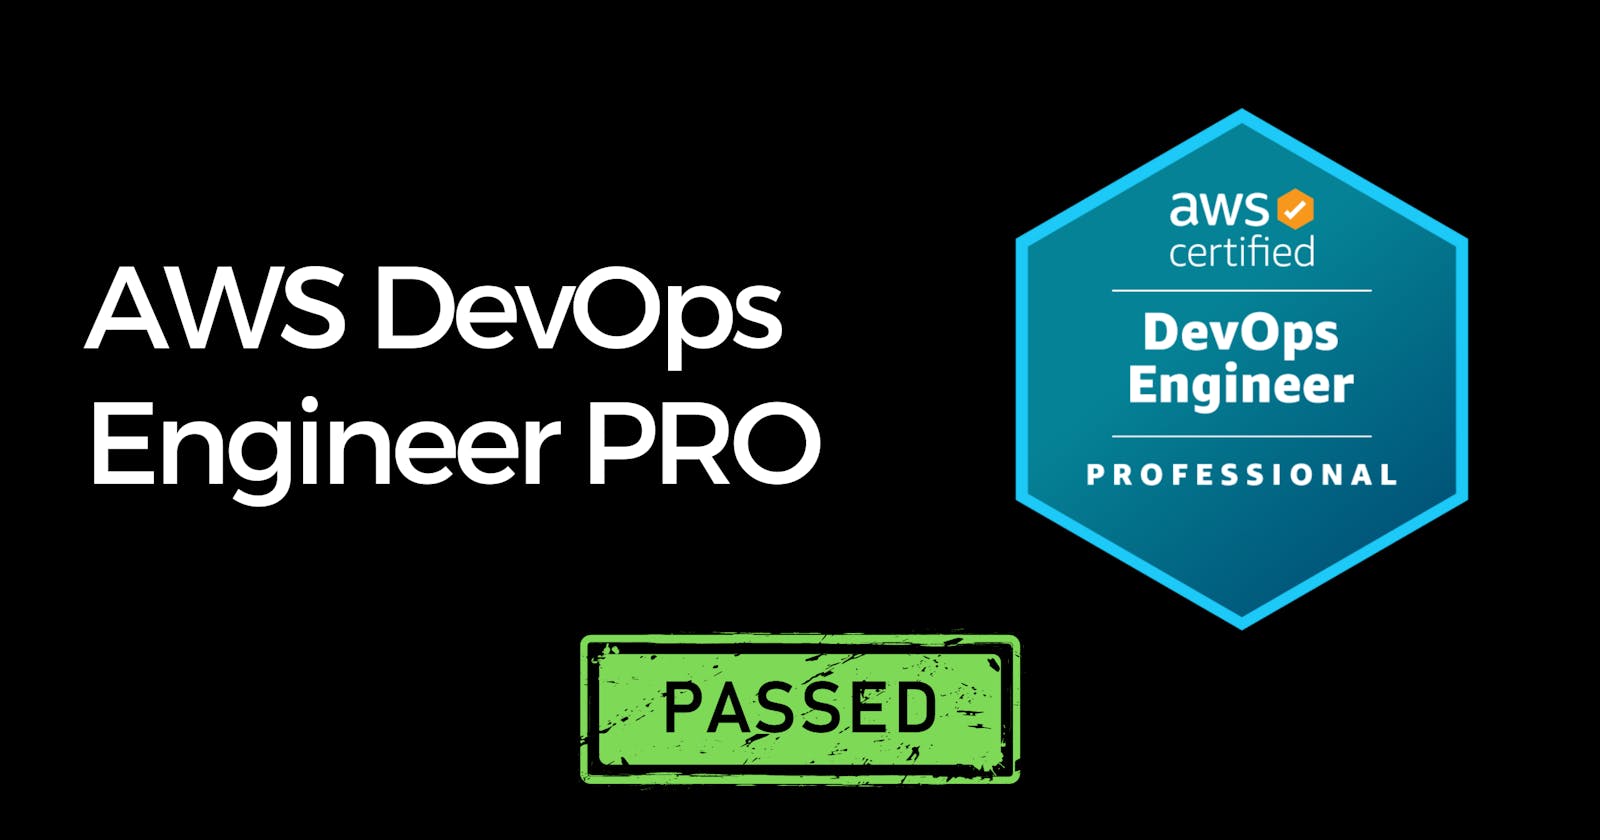 How I passed the AWS DevOps Engineer Professional Exam